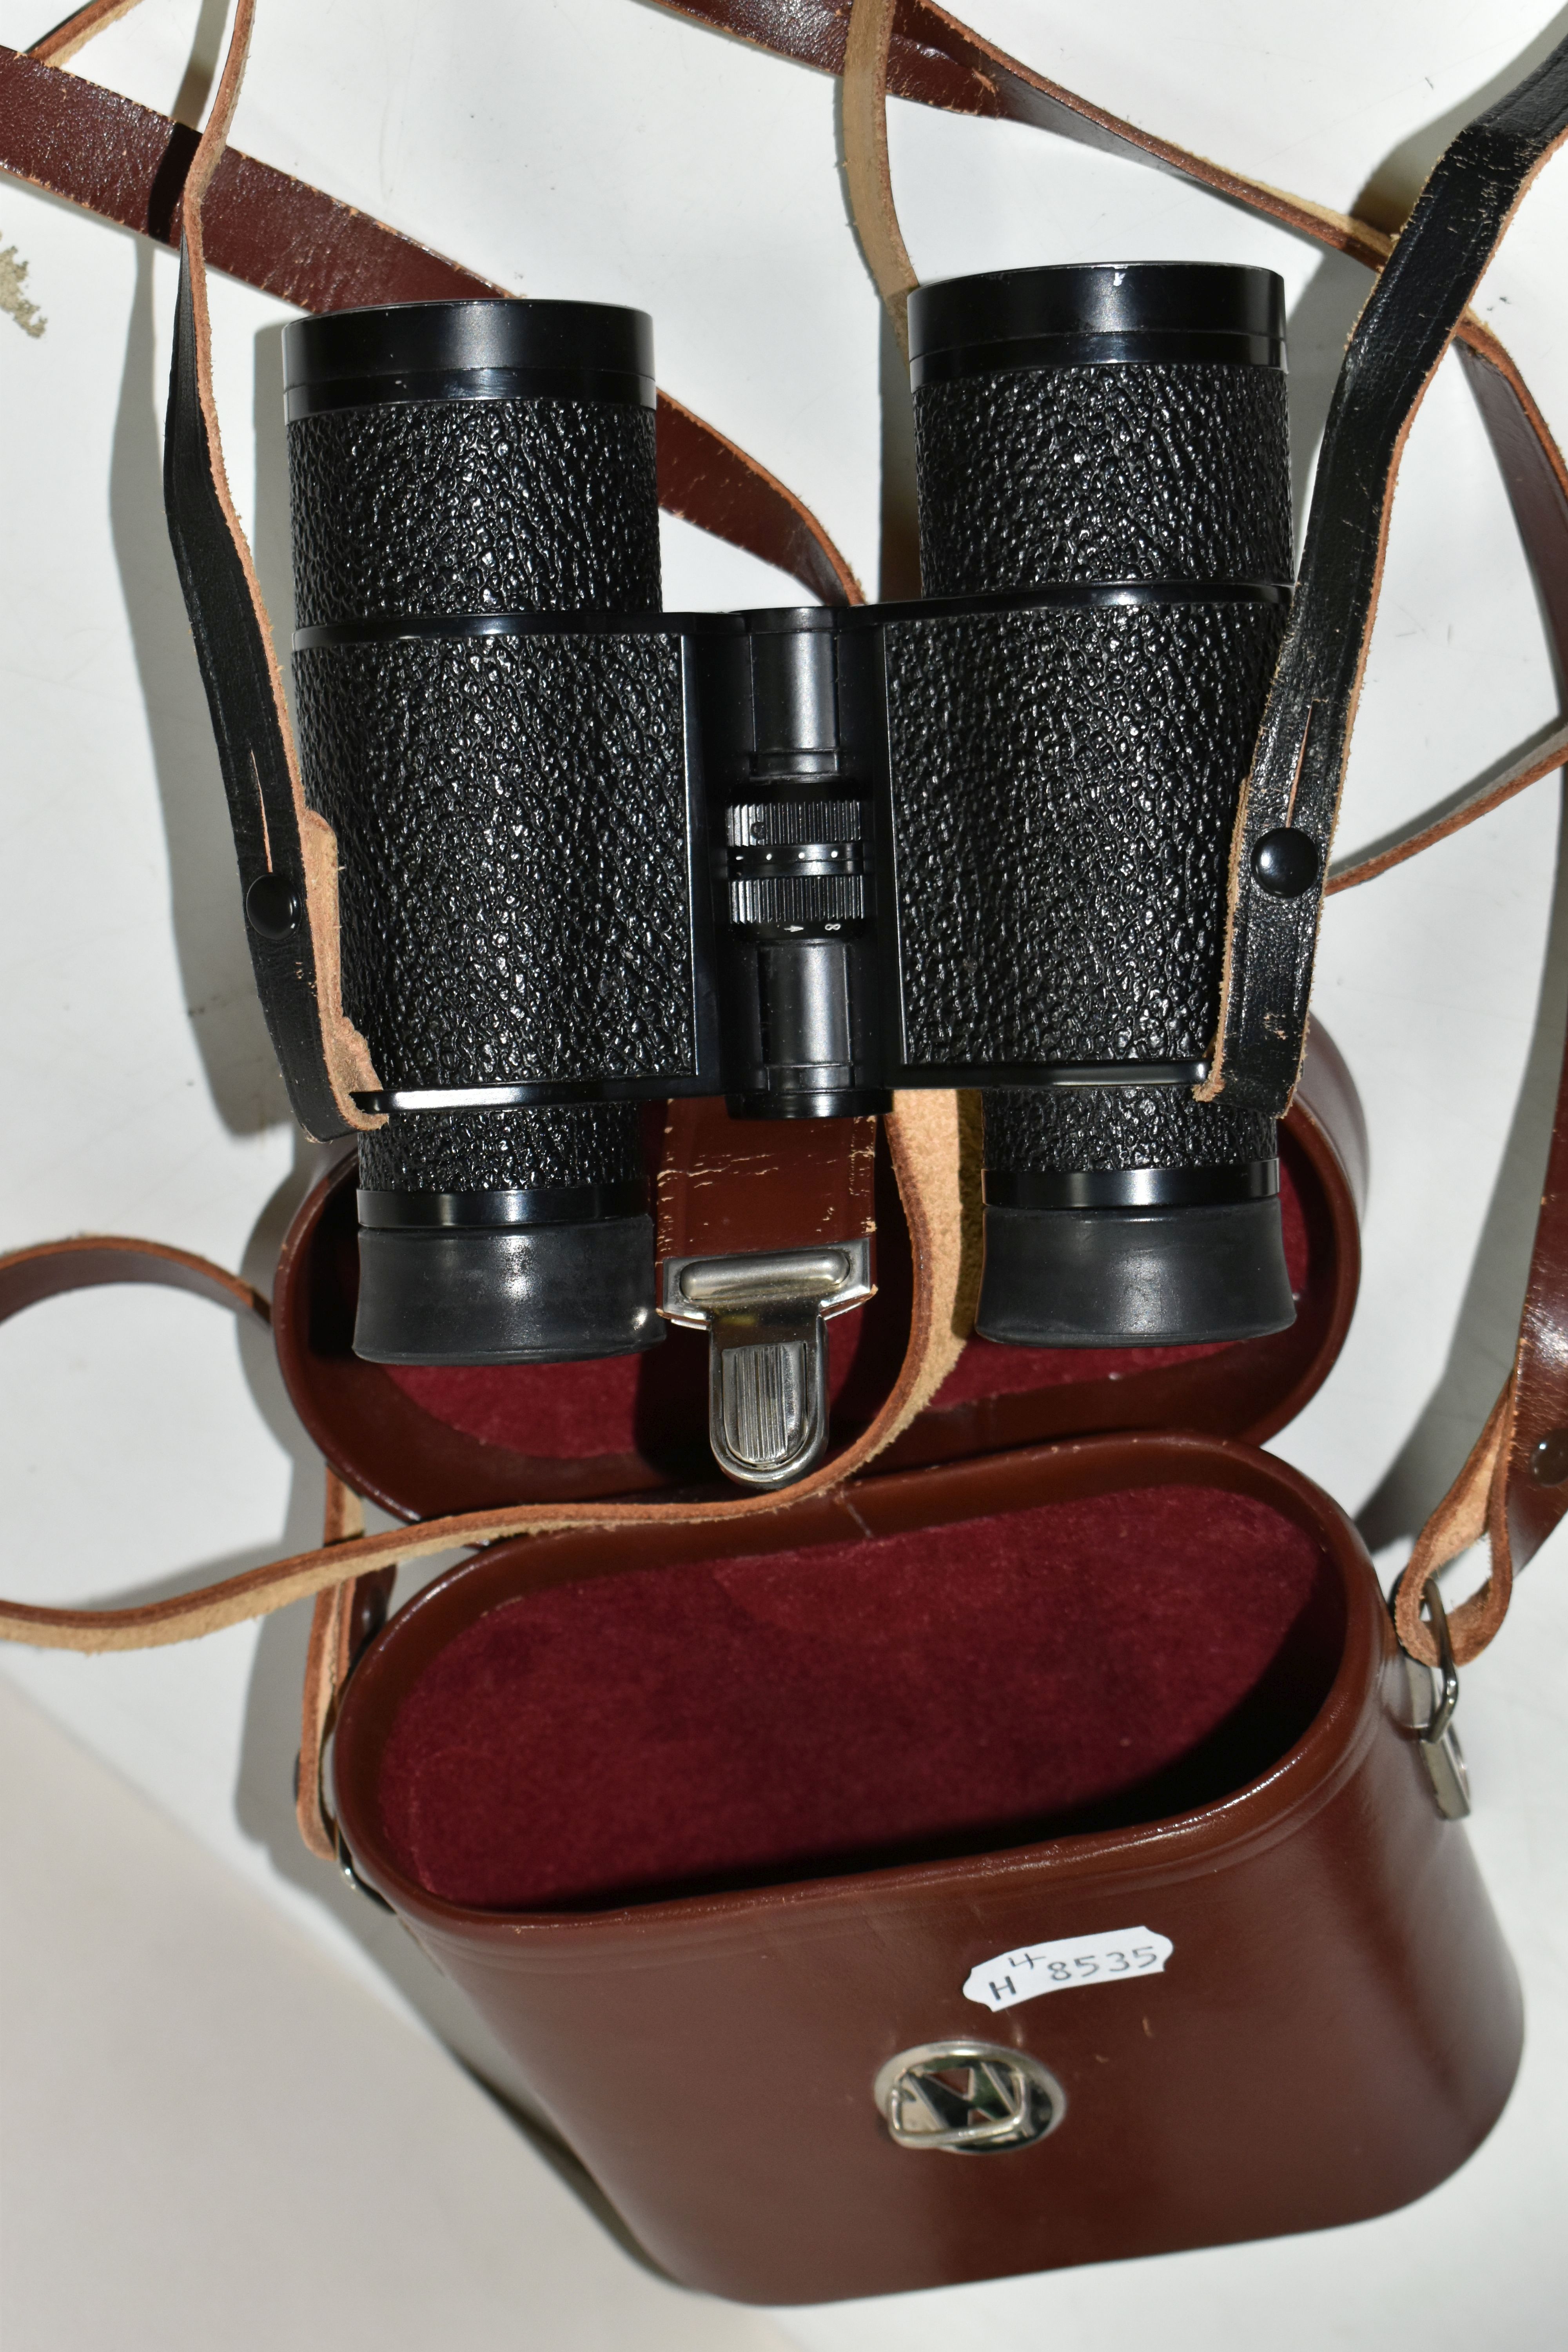 A PAIR OF CARL ZEISS NOTAREM 8X32 BINOCULARS WITH LEATHER CASE, Condition Report: internal optics - Image 4 of 4